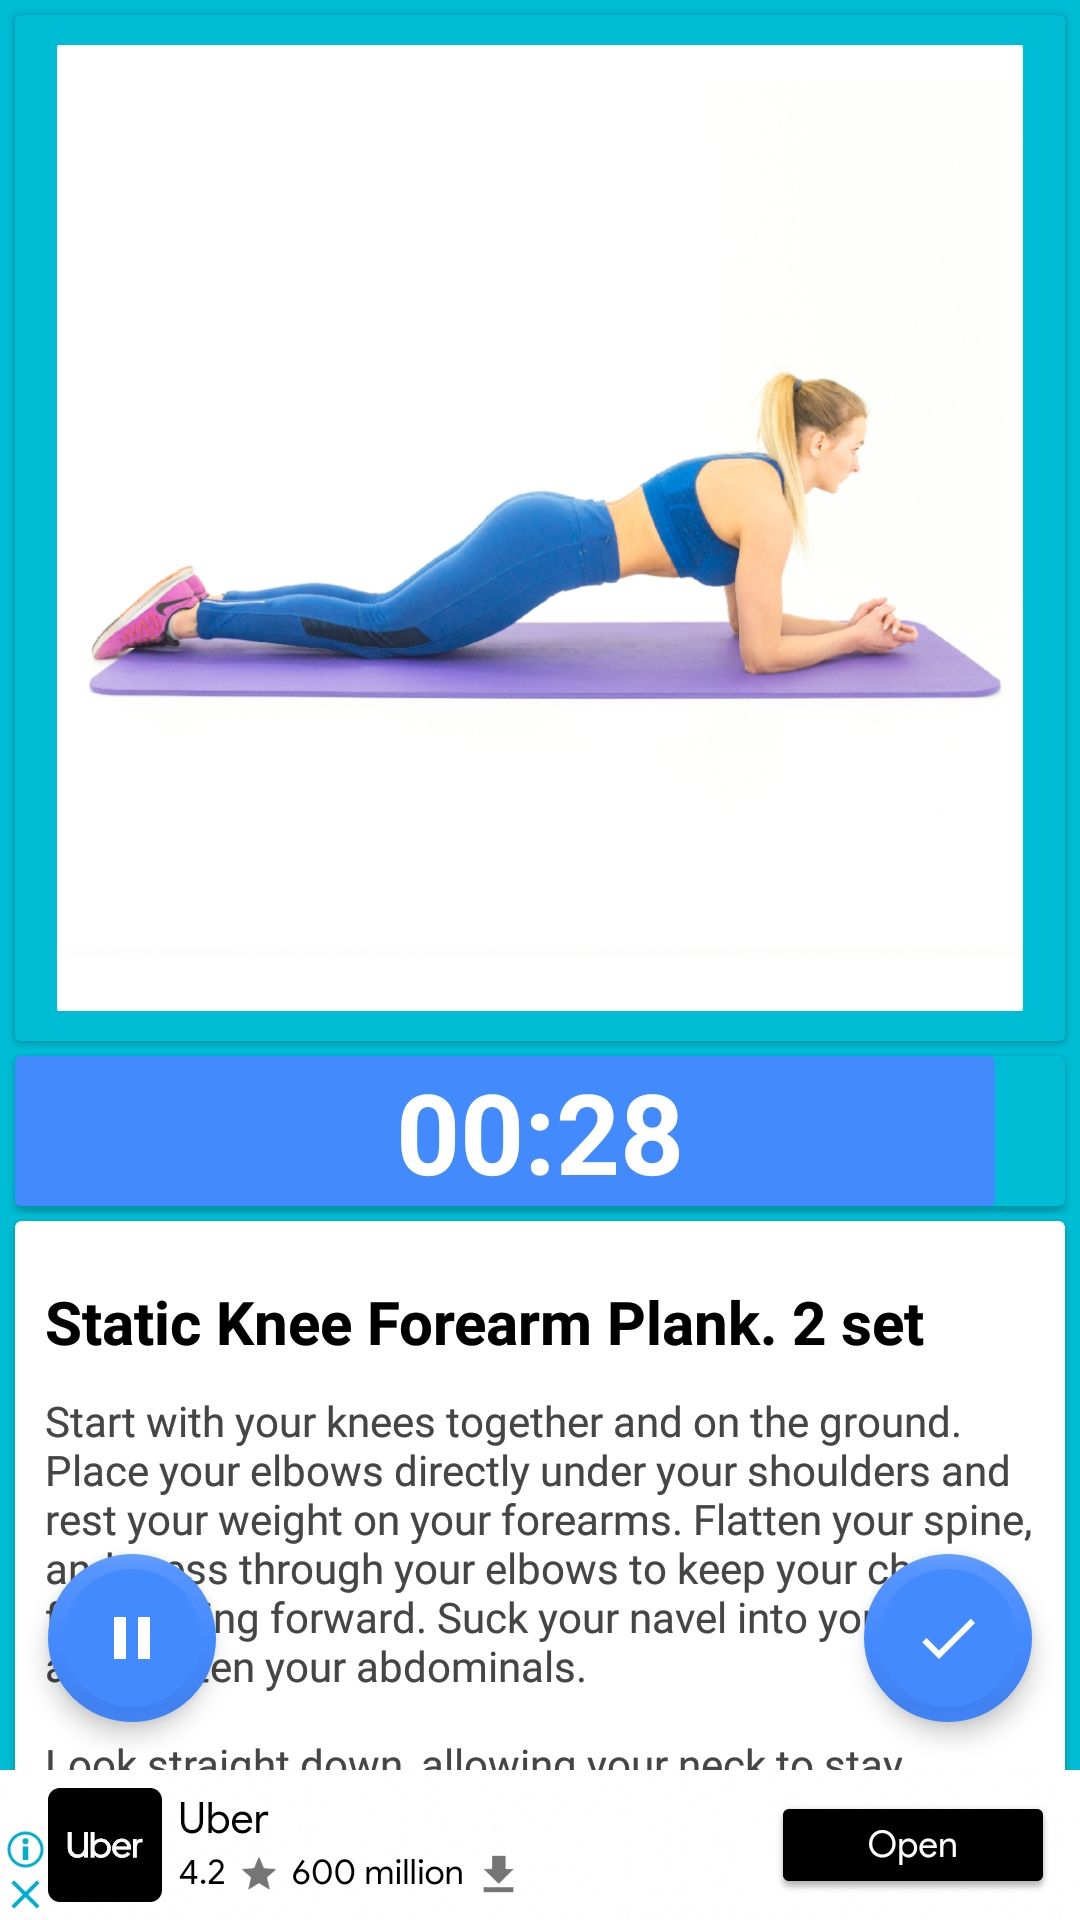 Plank Workout 30 Days mobile exercise app